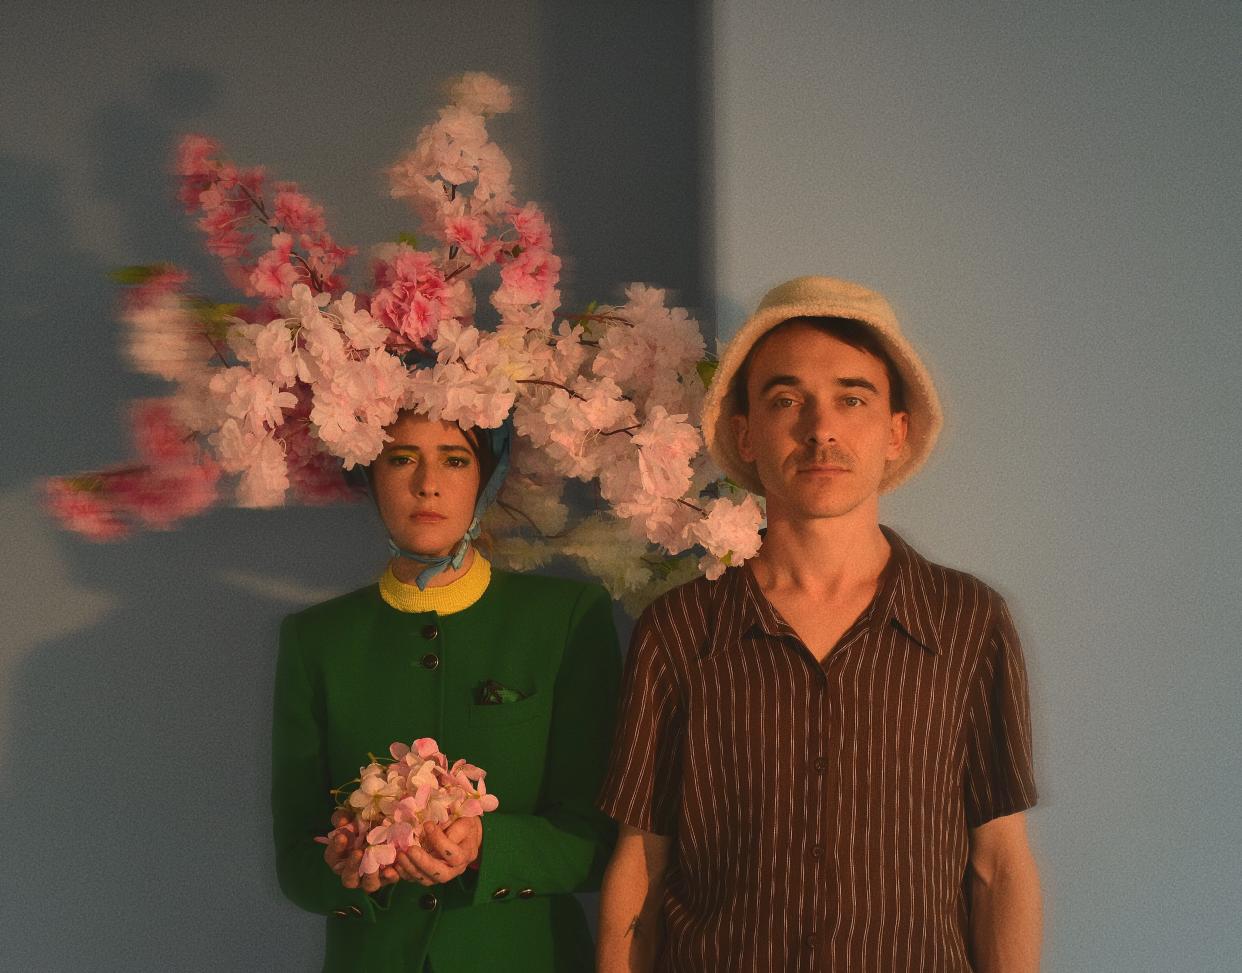 Joyous indie-pop duo Rubblebucket plays the Mohawk on Tuesday.